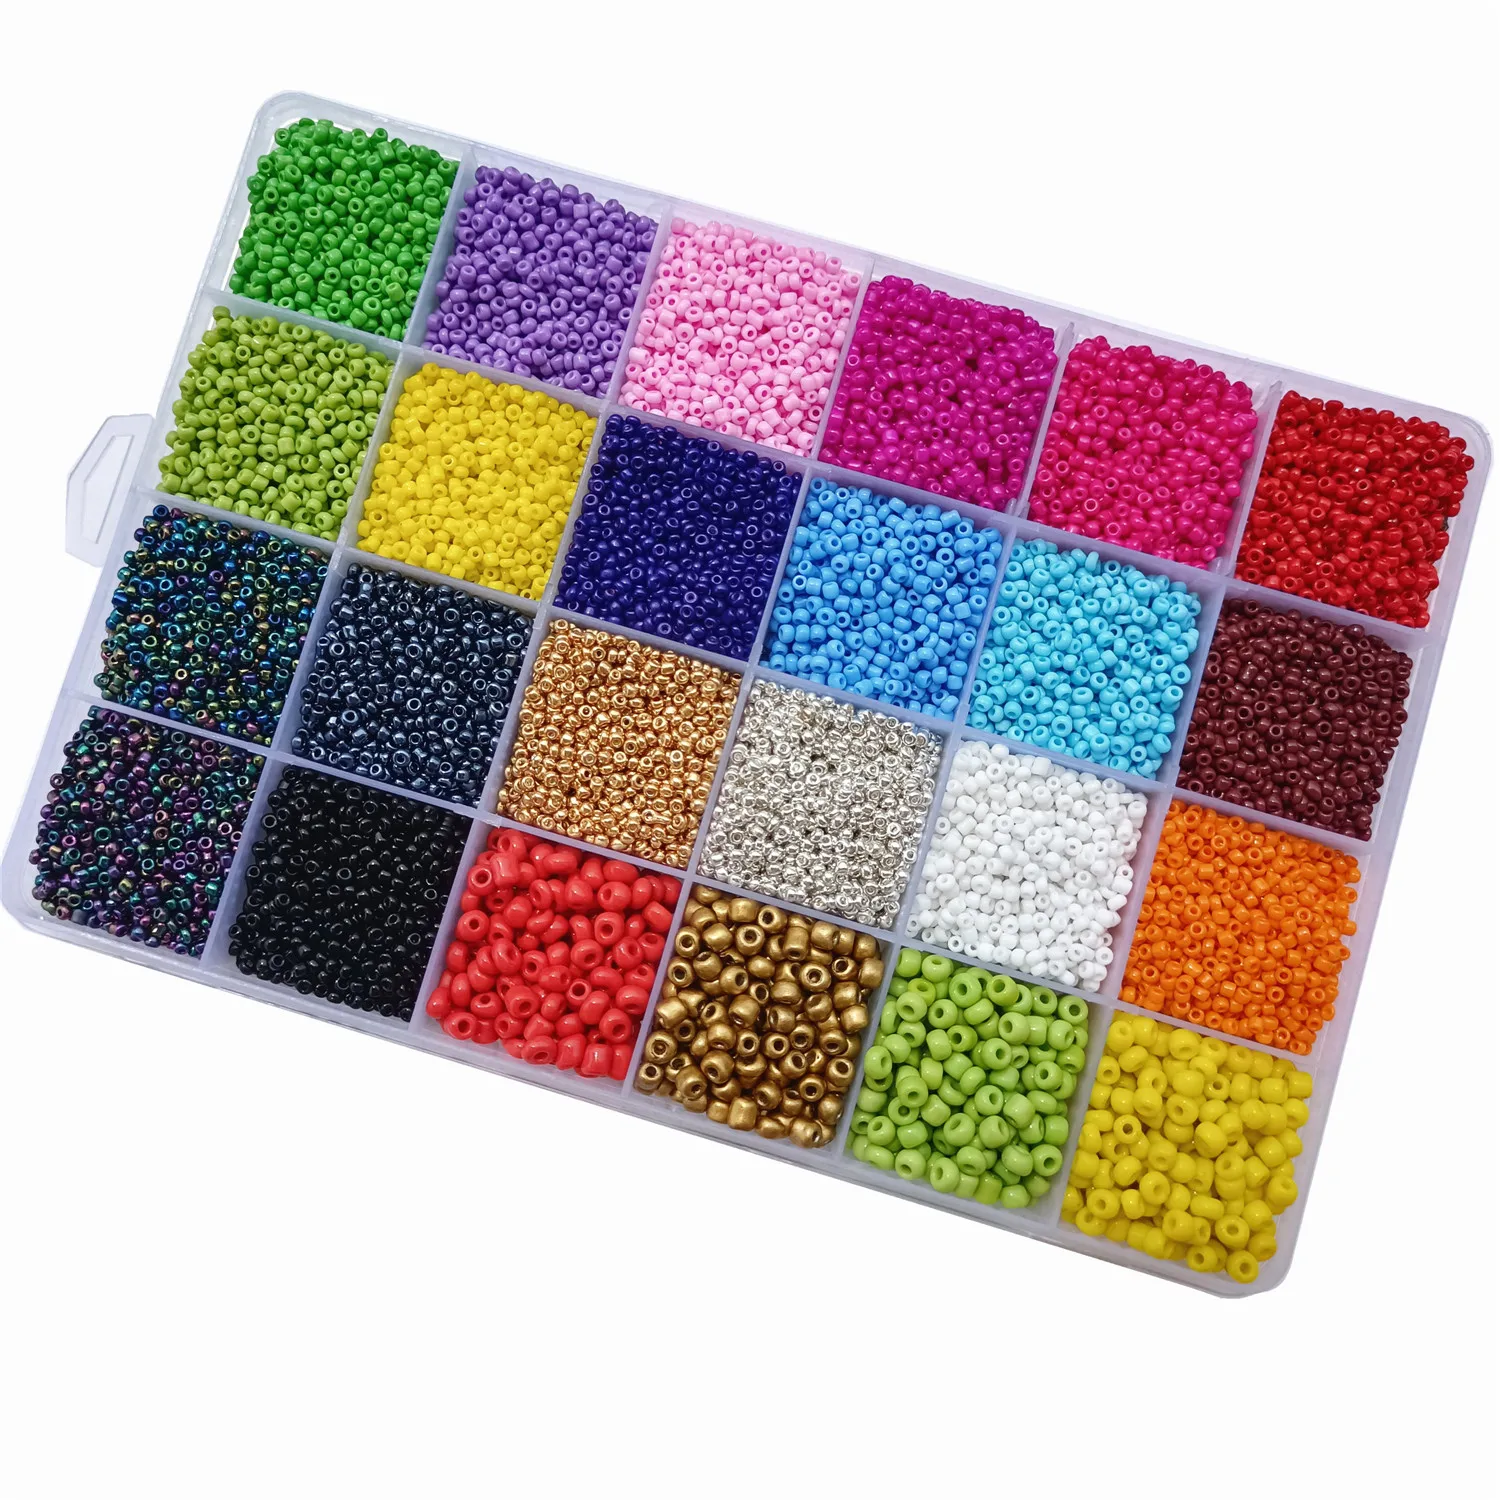 

1000pcs 2mm Czech Seed Glass Beads Round Spacer Loose Beads for Jewelry Making Charm DIY Handmade Bracelet Necklace Accessories